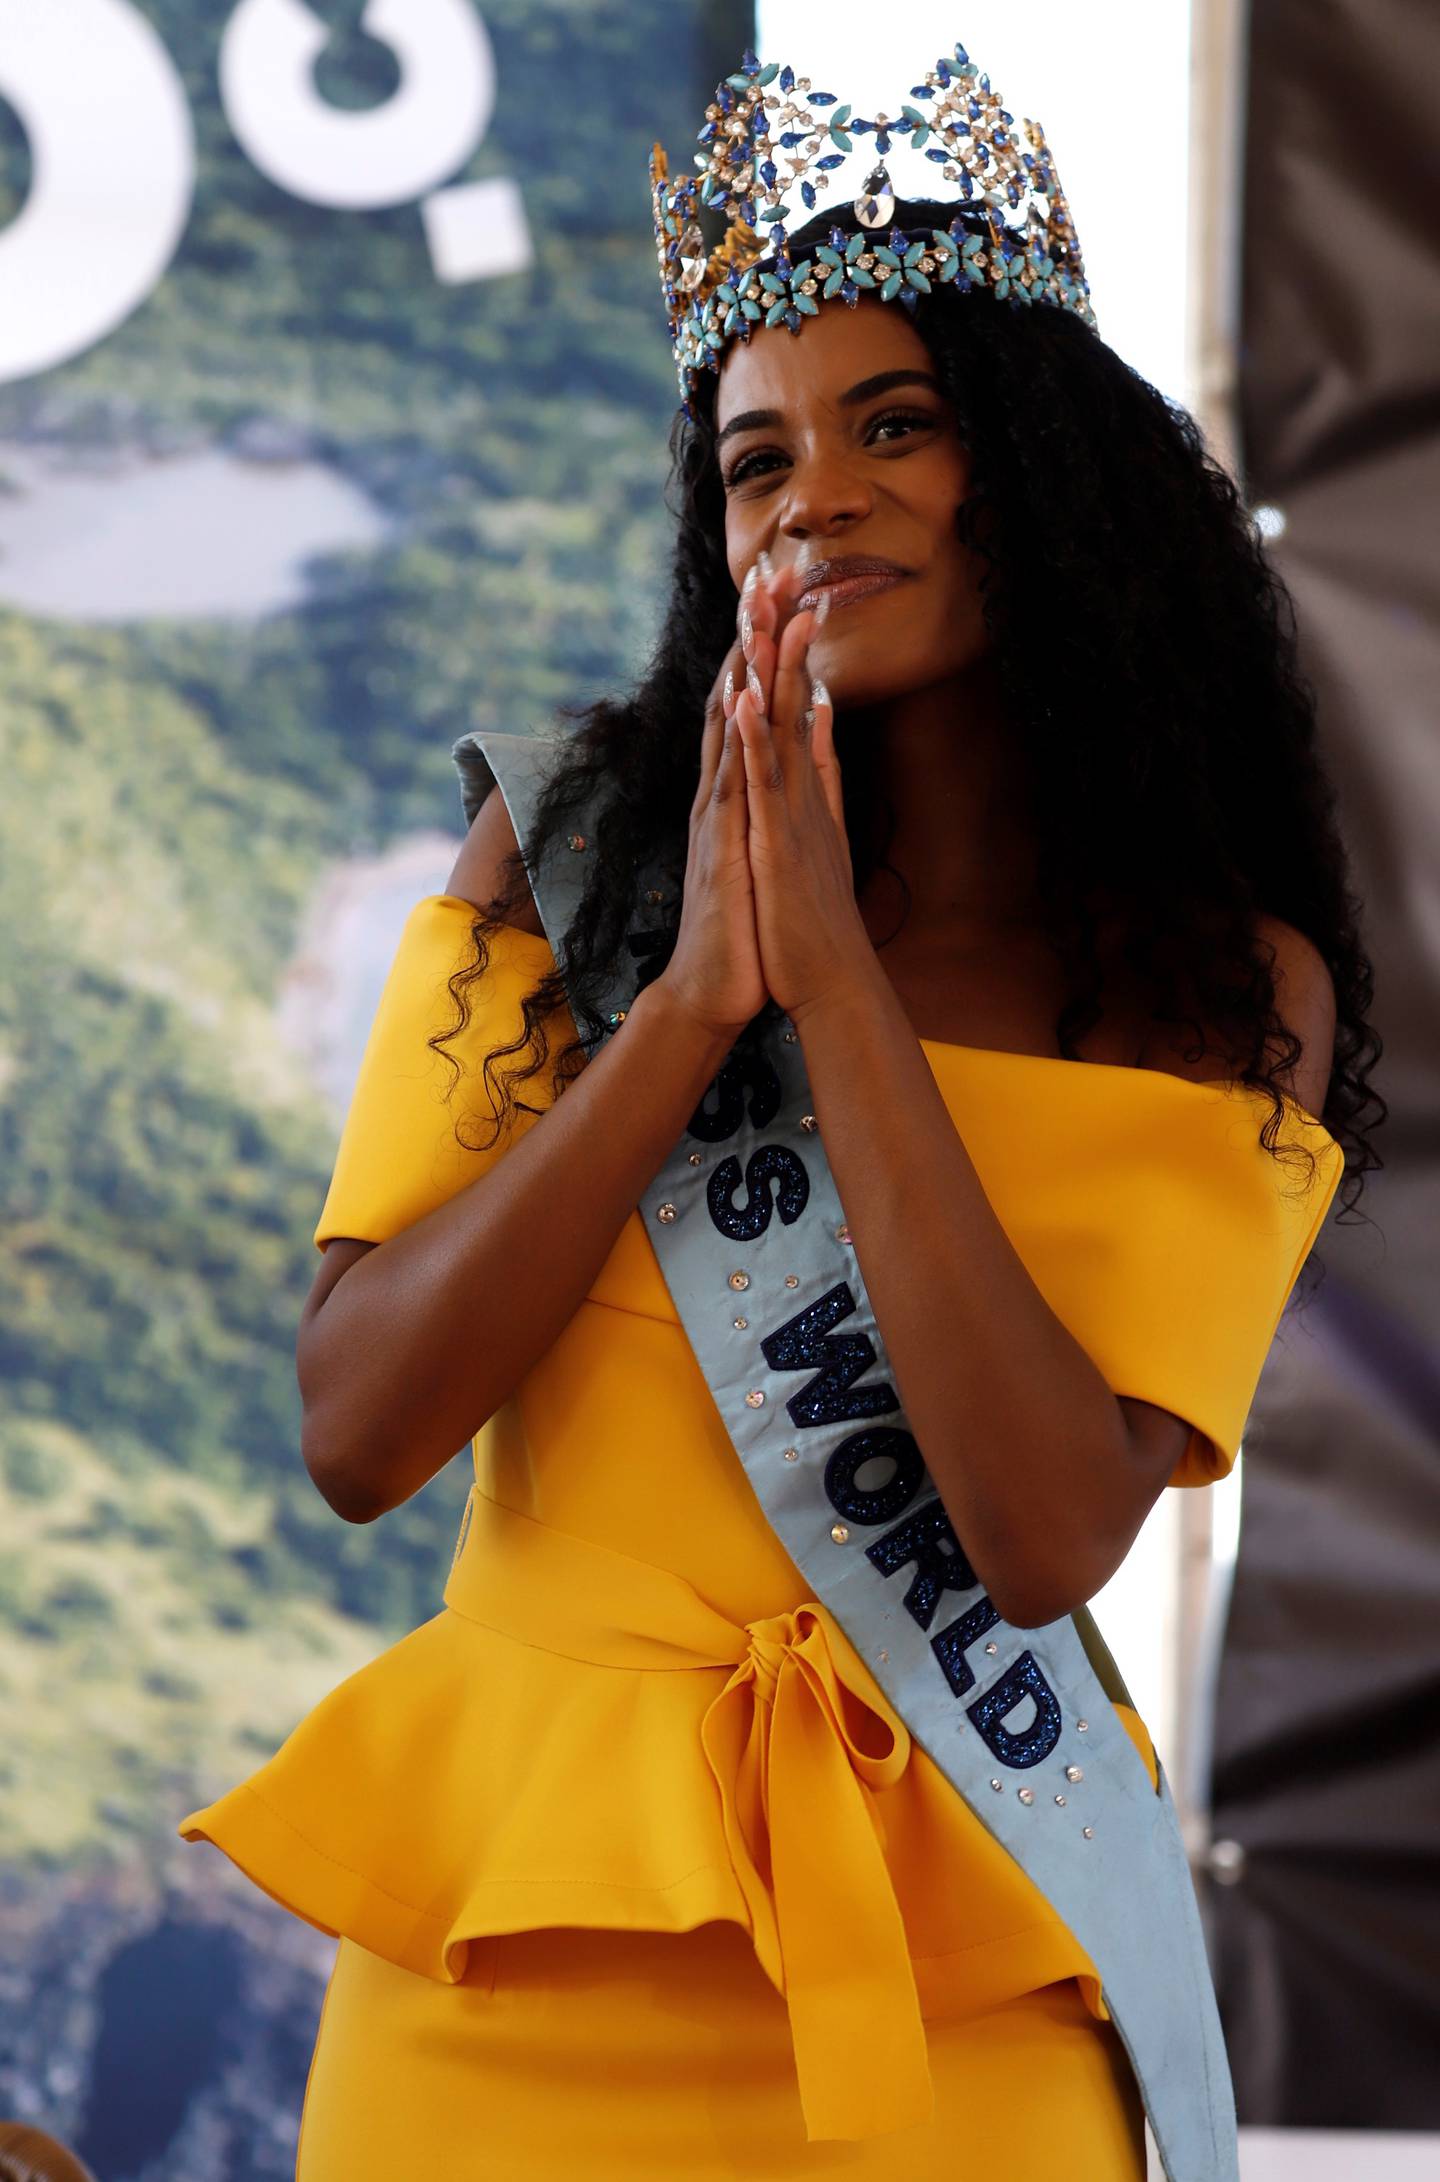 Reigning Miss World Toni-Ann Singh attends the welcoming ceremony of the candidates for Miss World 2021. EPA